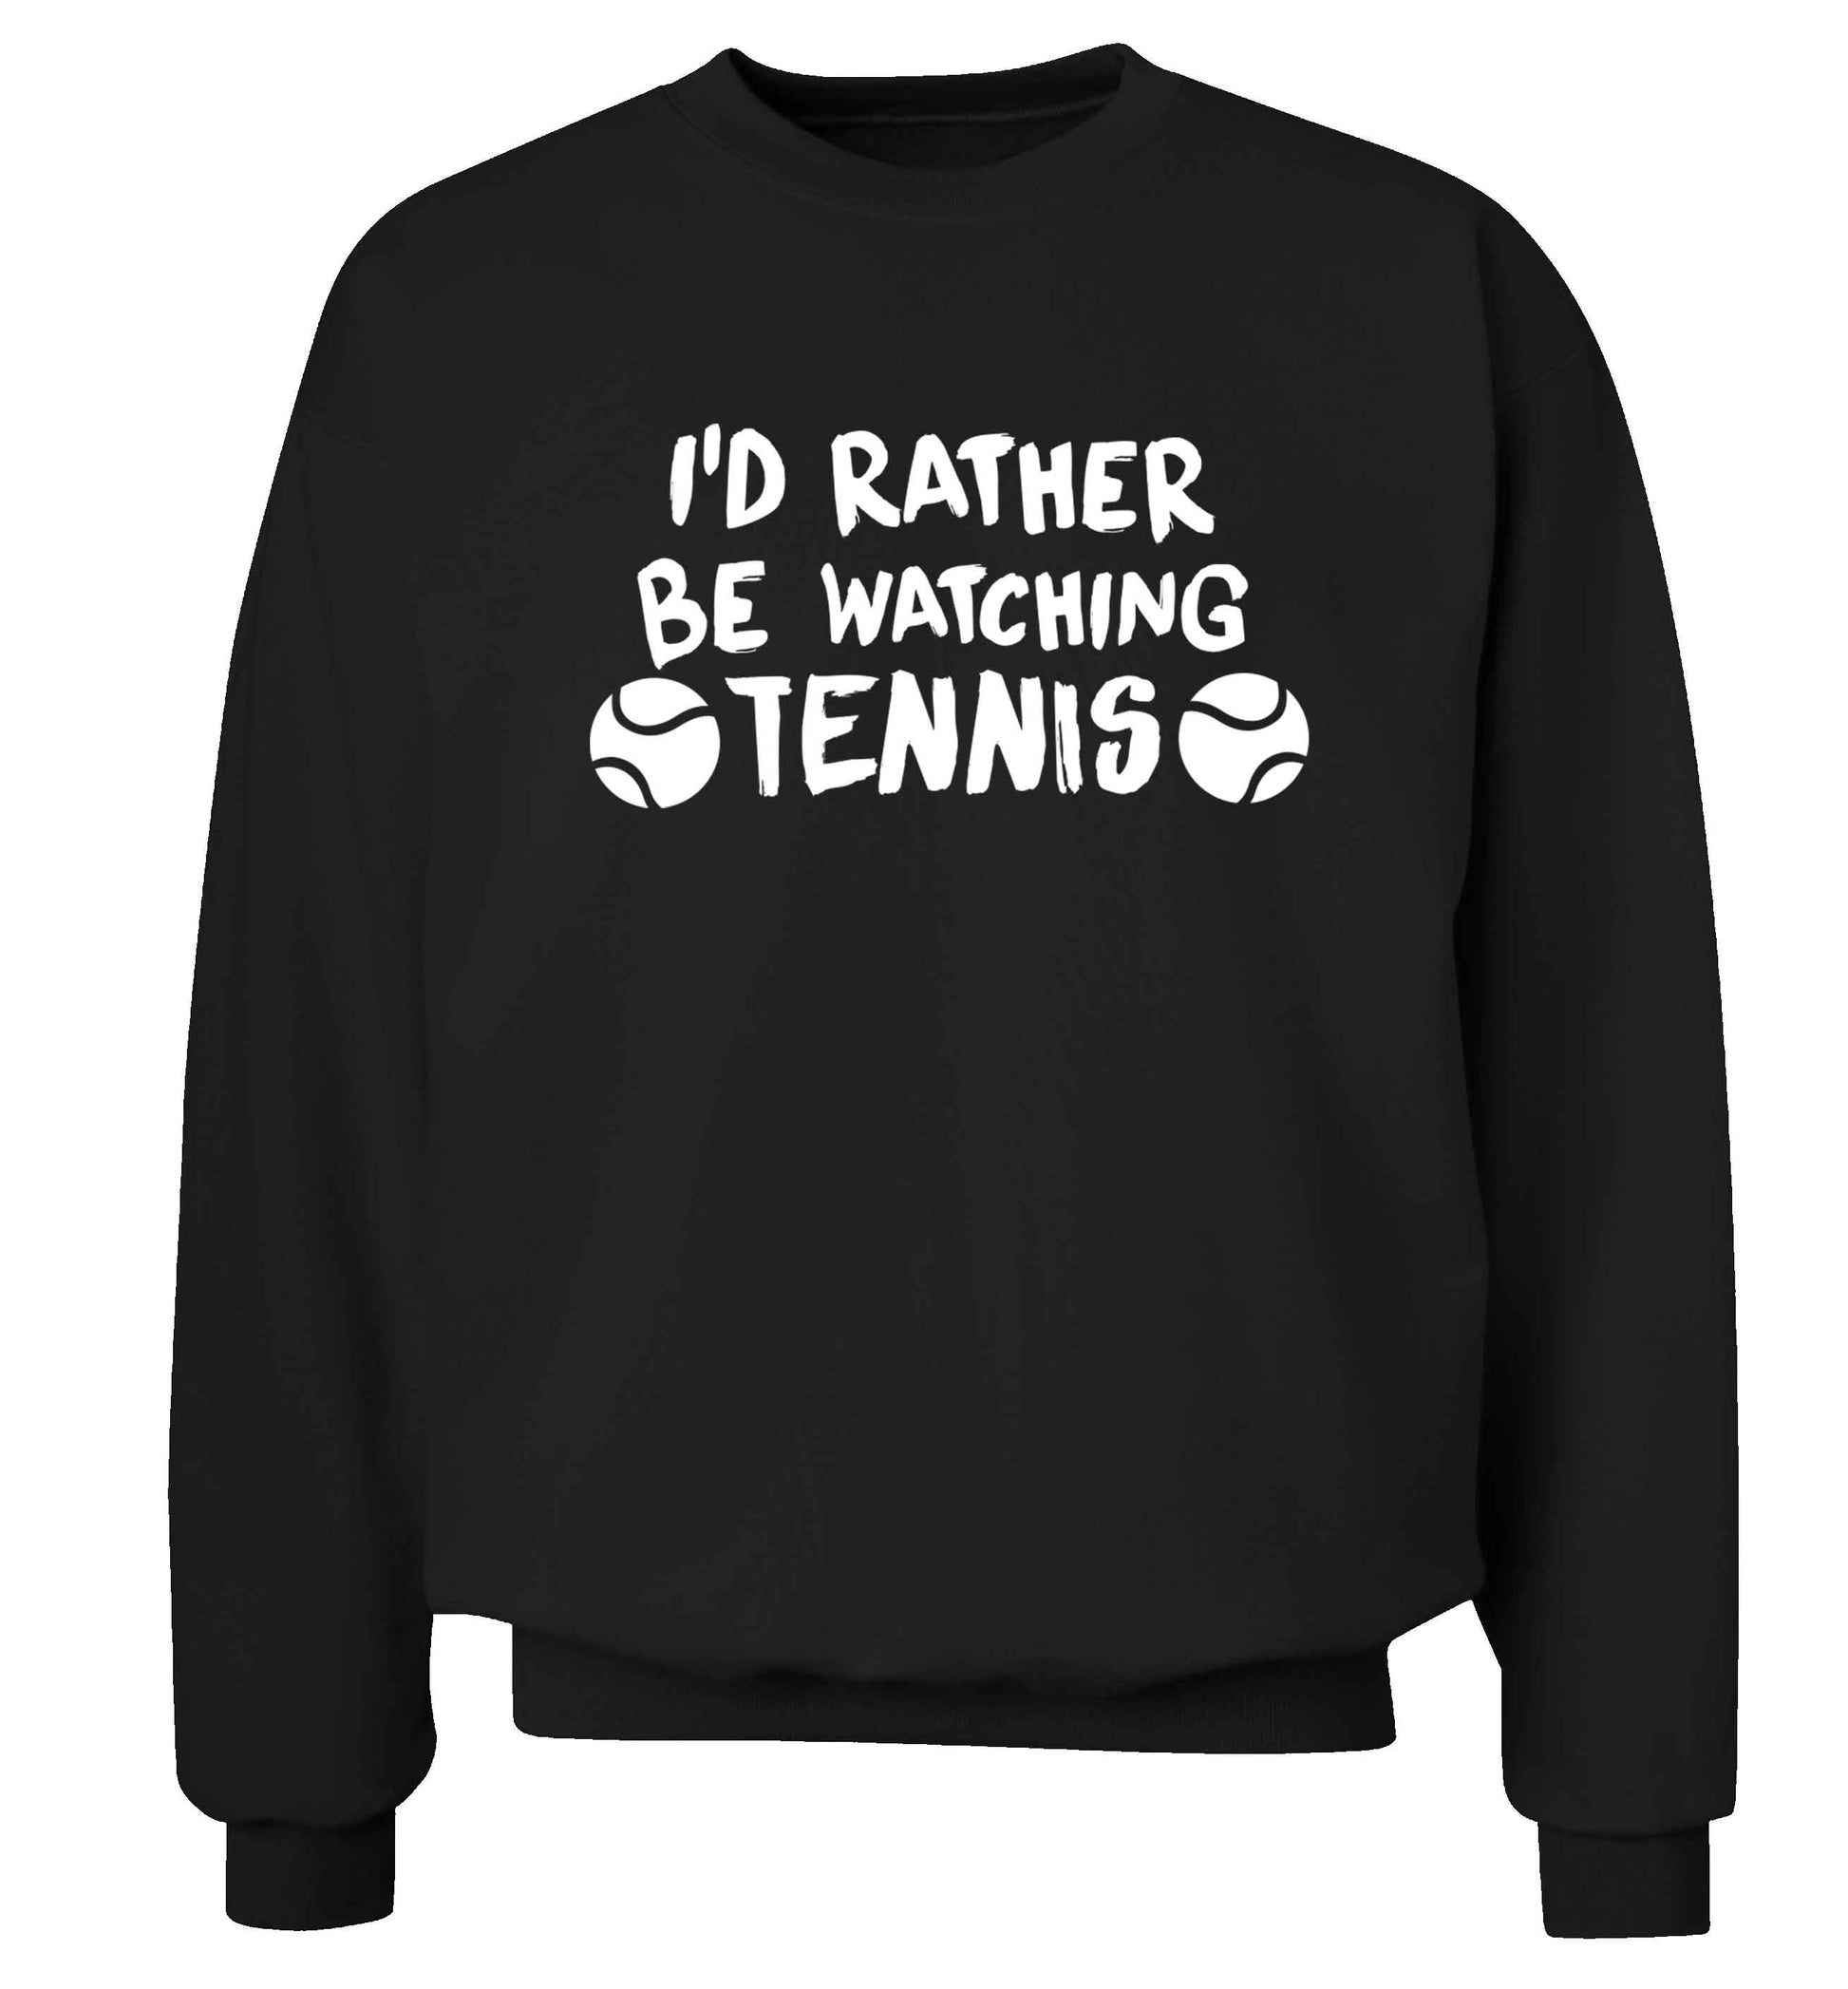 I'd rather be watching the tennis Adult's unisex black Sweater 2XL